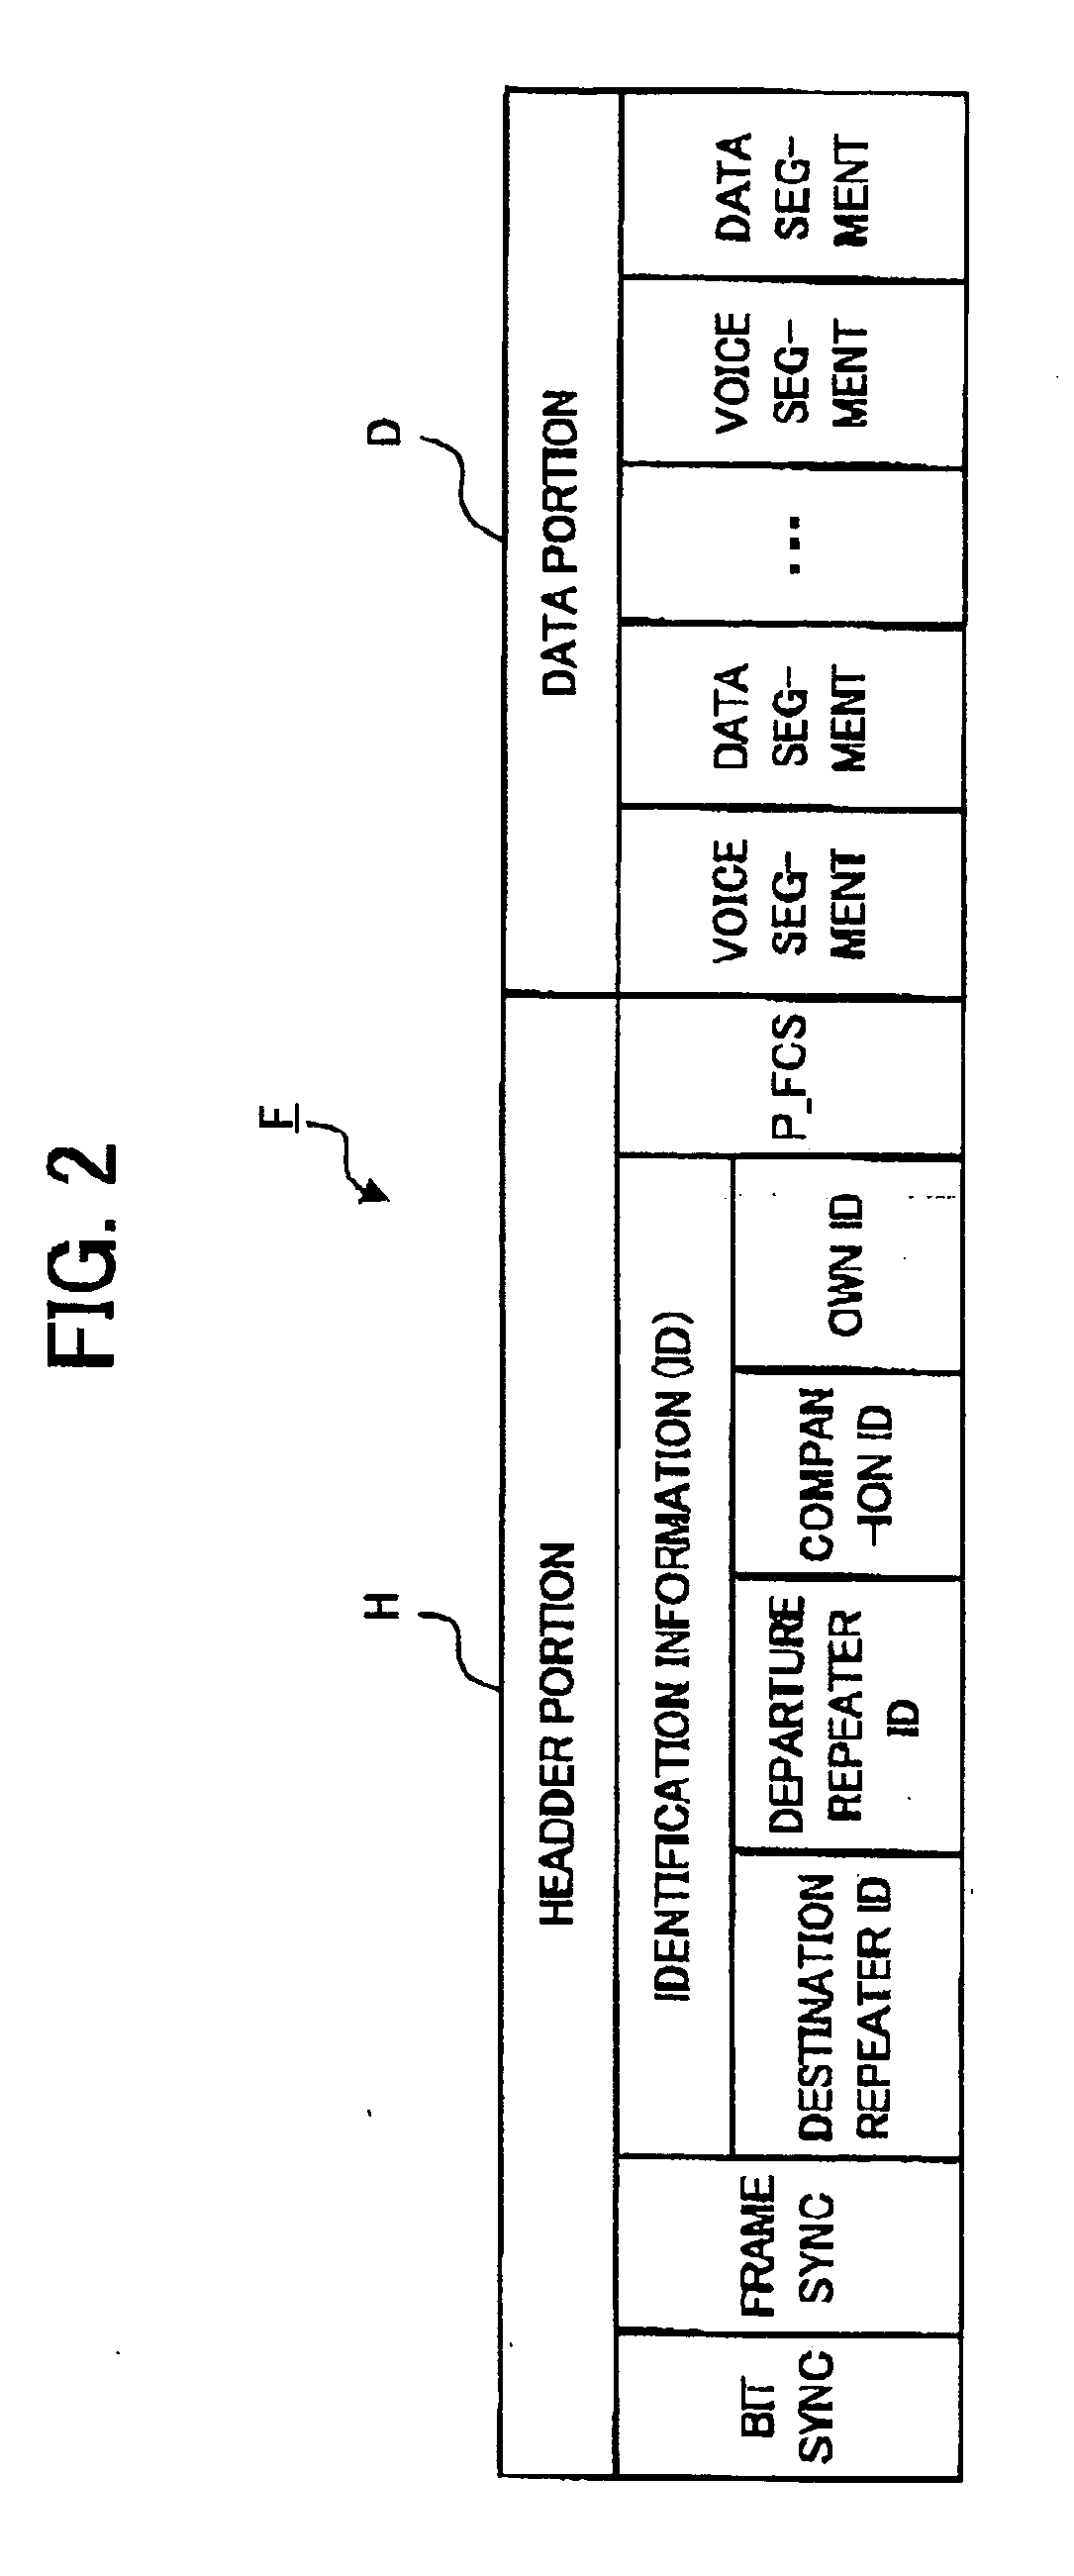 Radio terminal, method for producing communication packet, and computer-readable recording medium